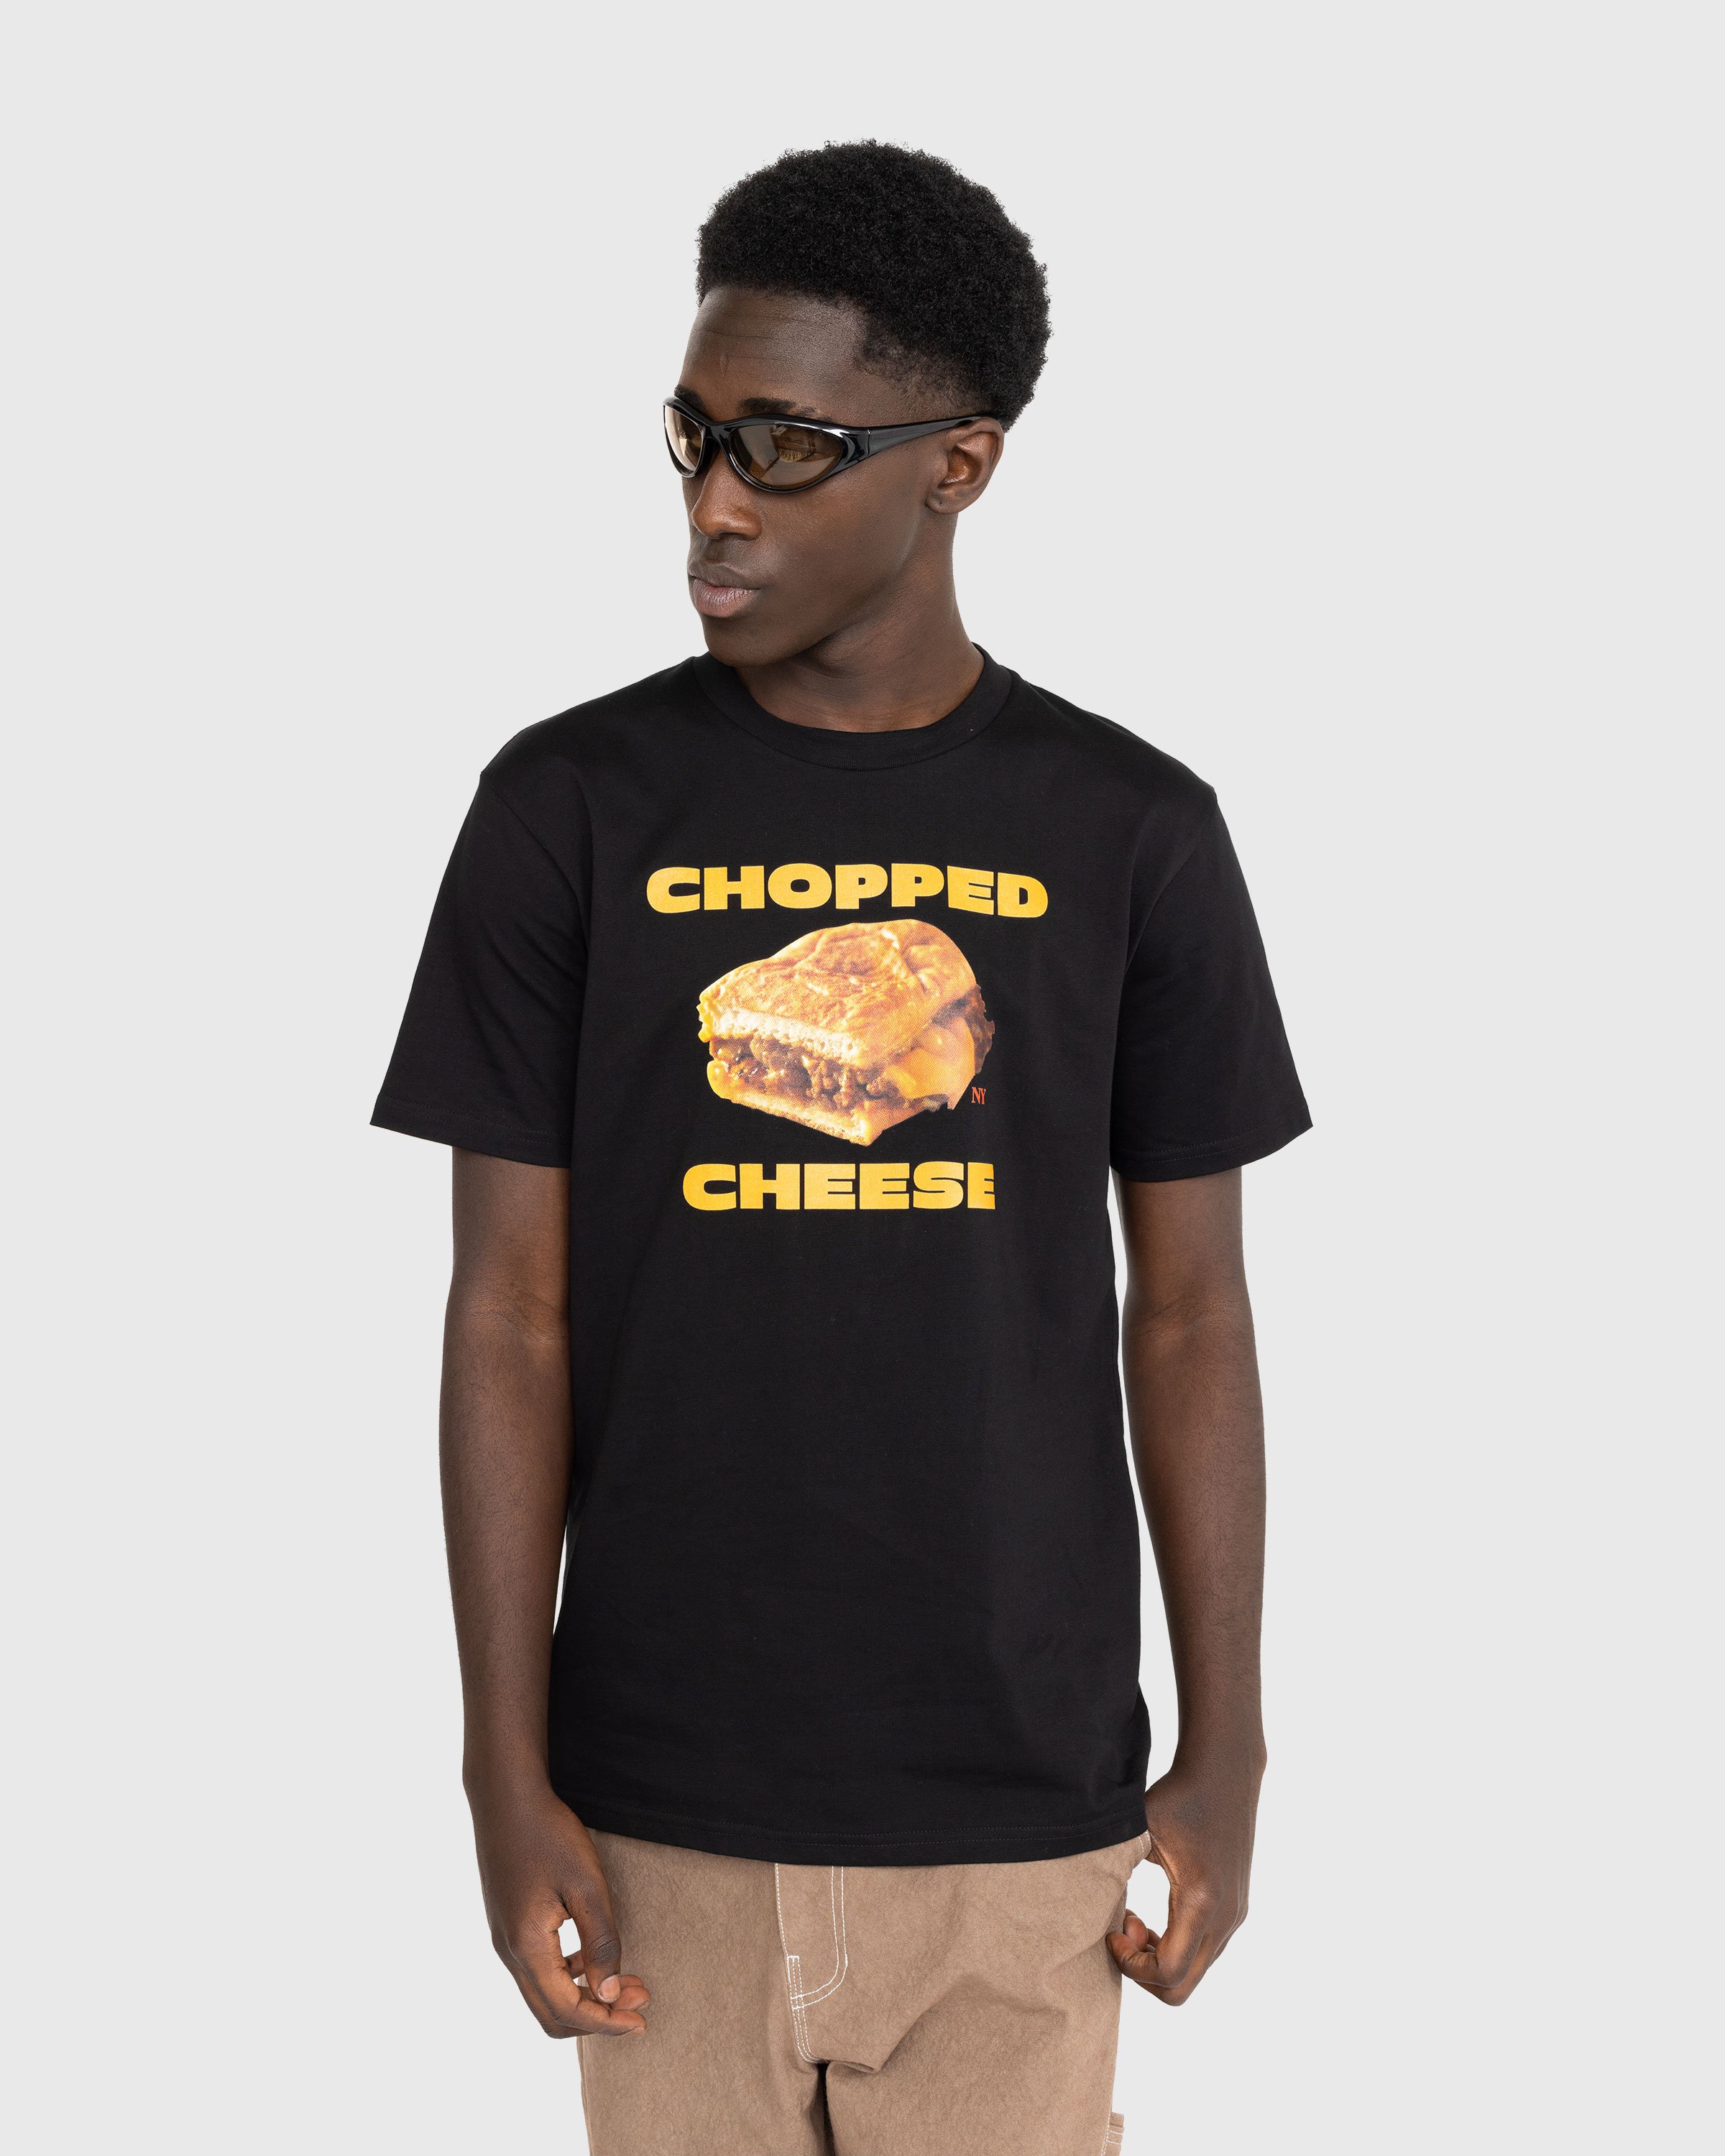 At The Moment x Highsnobiety - Chopped Cheese T-Shirt - Clothing - Black - Image 3